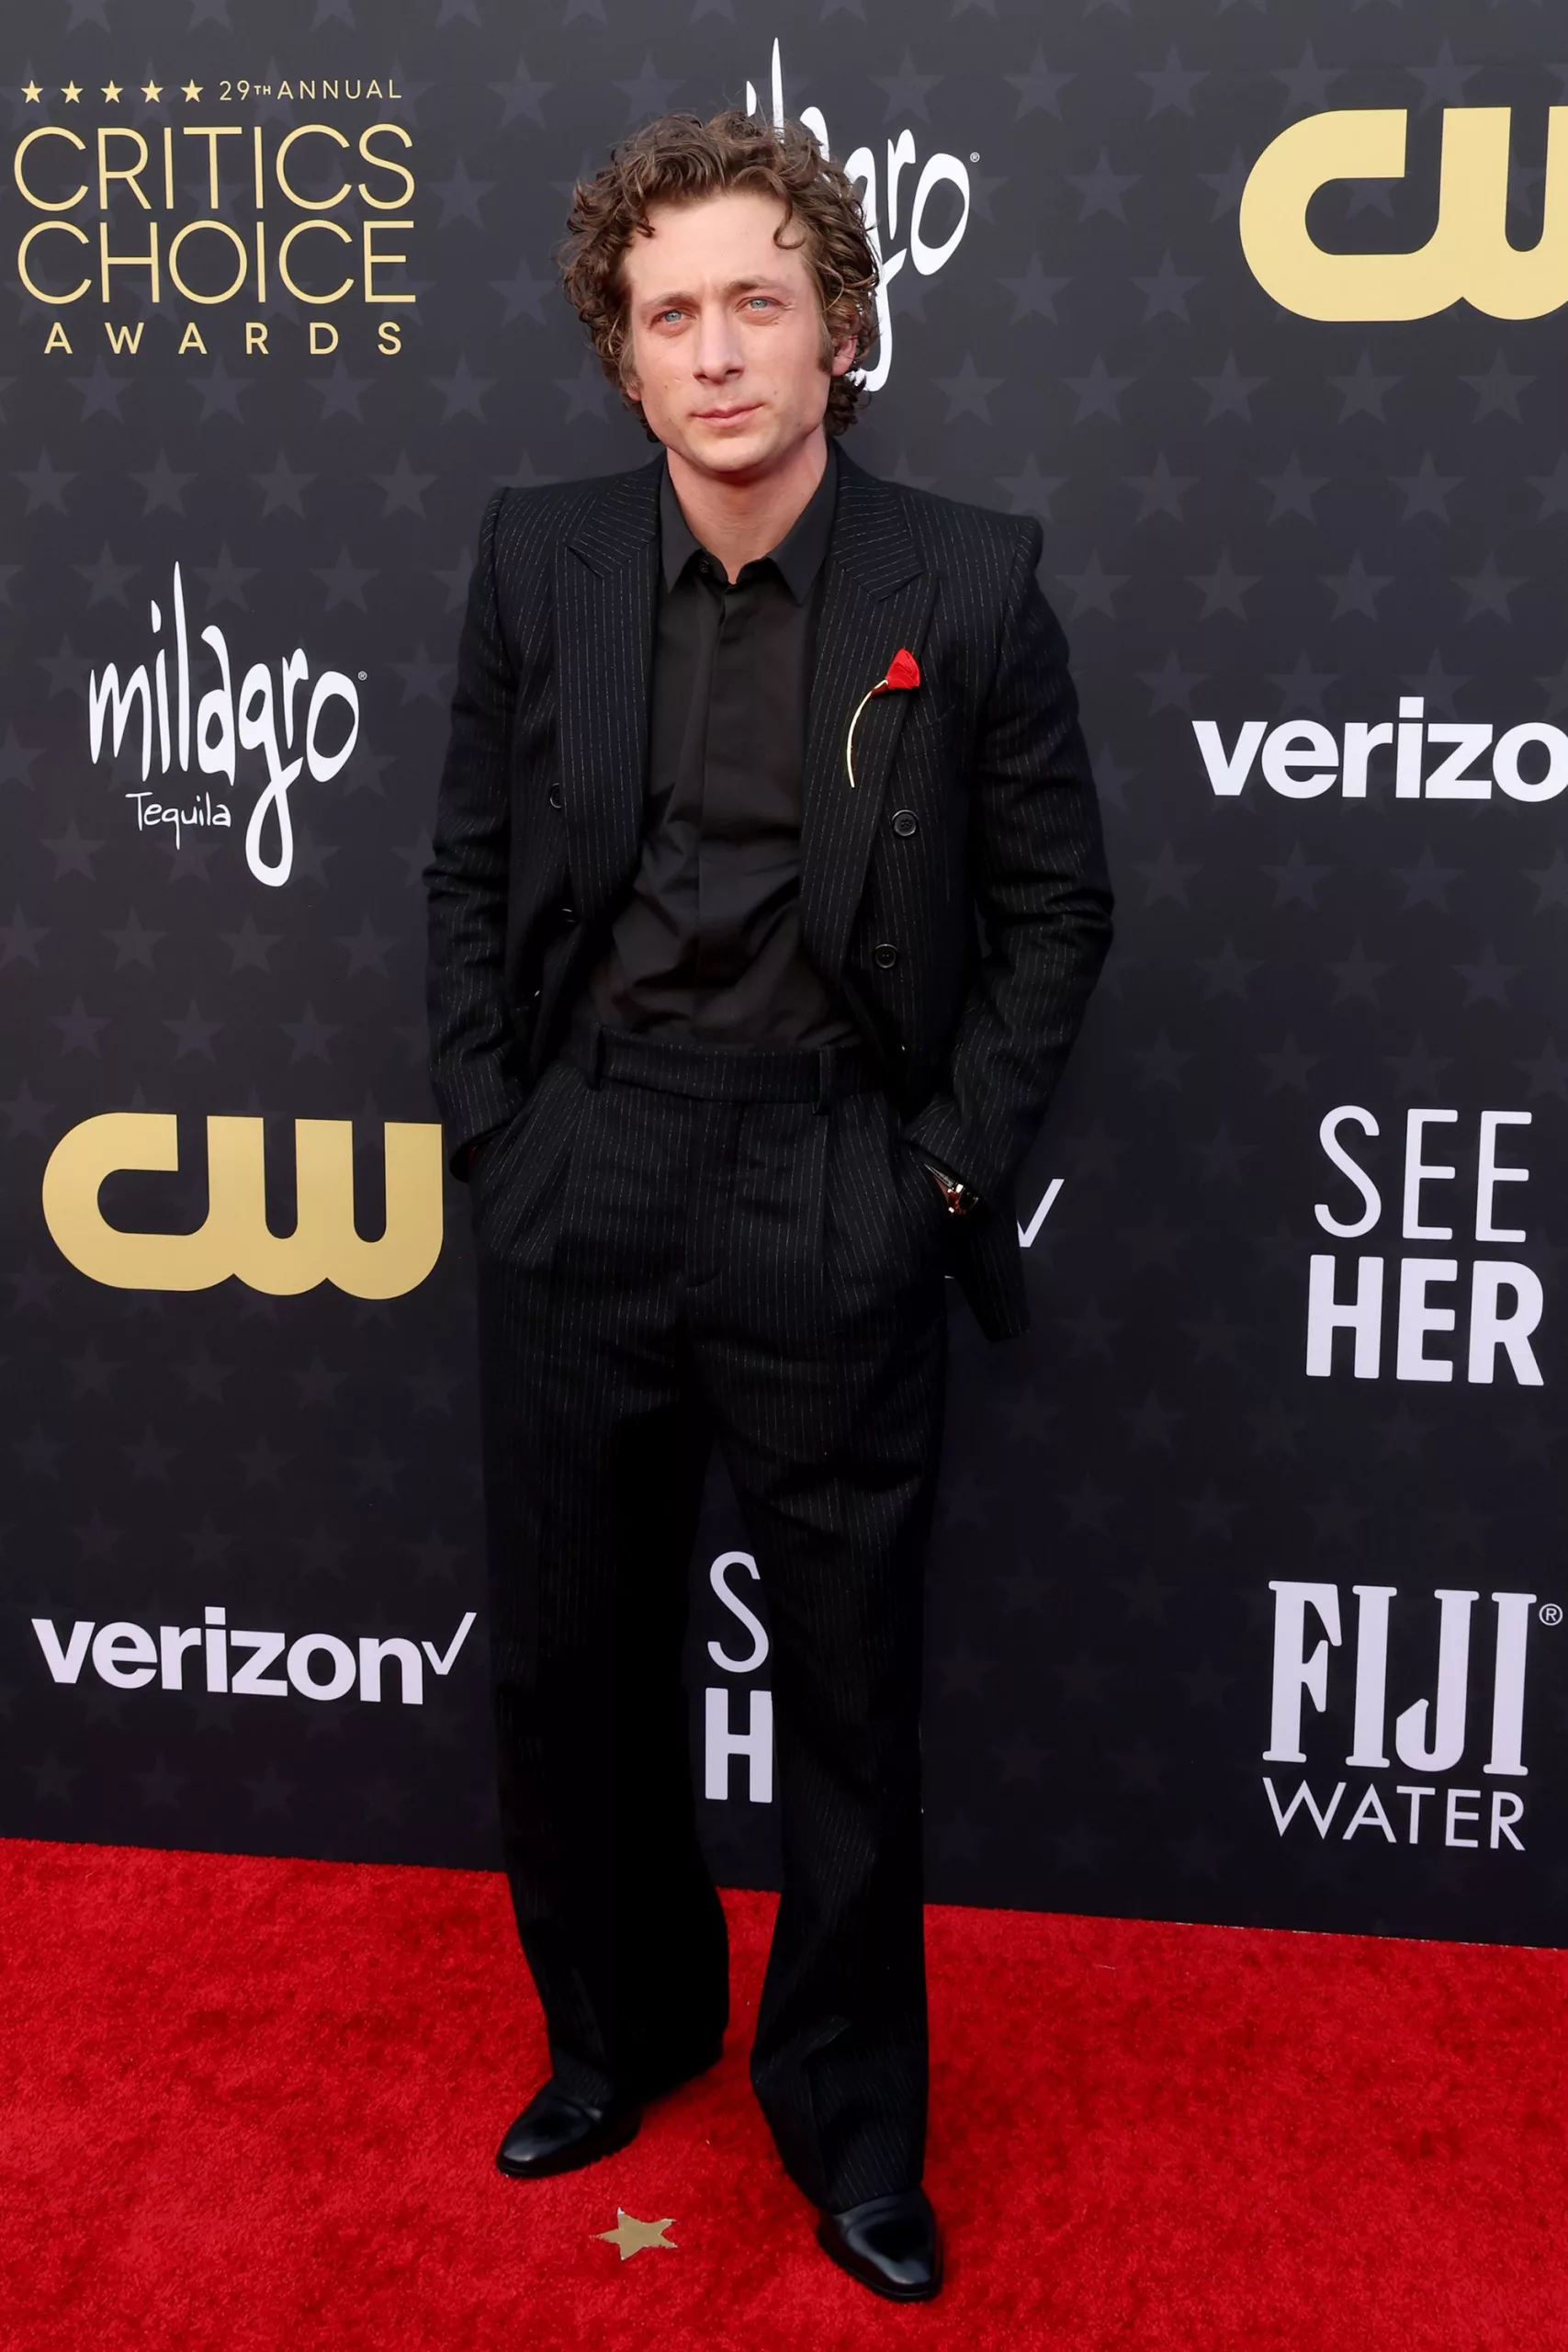 “The Bear” star Jeremy Allen White wore a pinstripe Saint Laurent suit, accessorized with a rose-shaped Tiffany & Co. brooch.